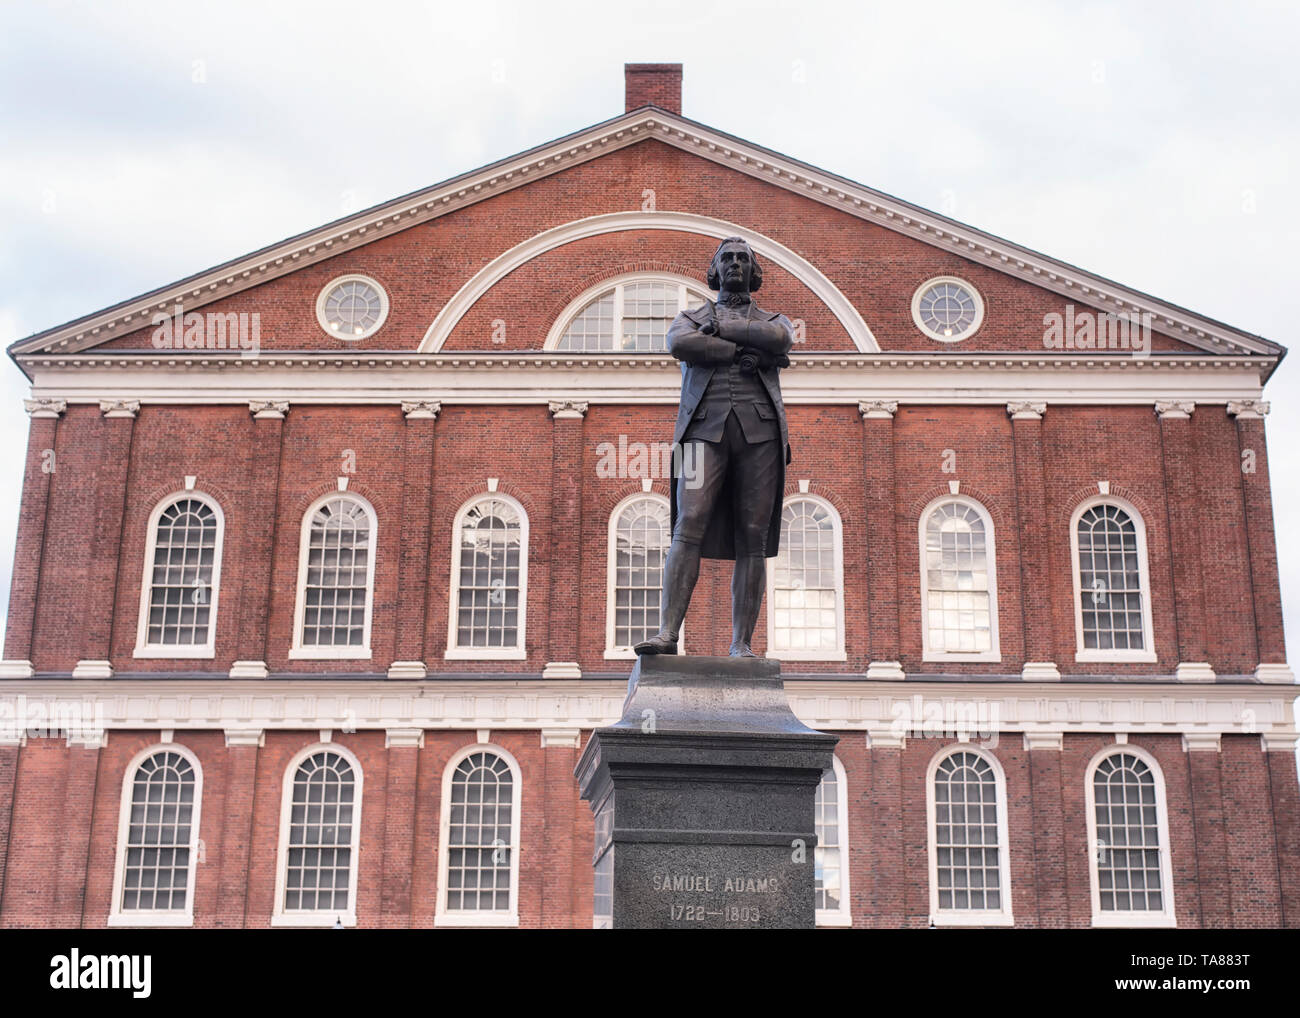 Boston, Massachusetts.  October 30, 2019. The red brick exterior architecture of the historic faneuil hall behind the samuel adam statue in Boston Mas Stock Photo